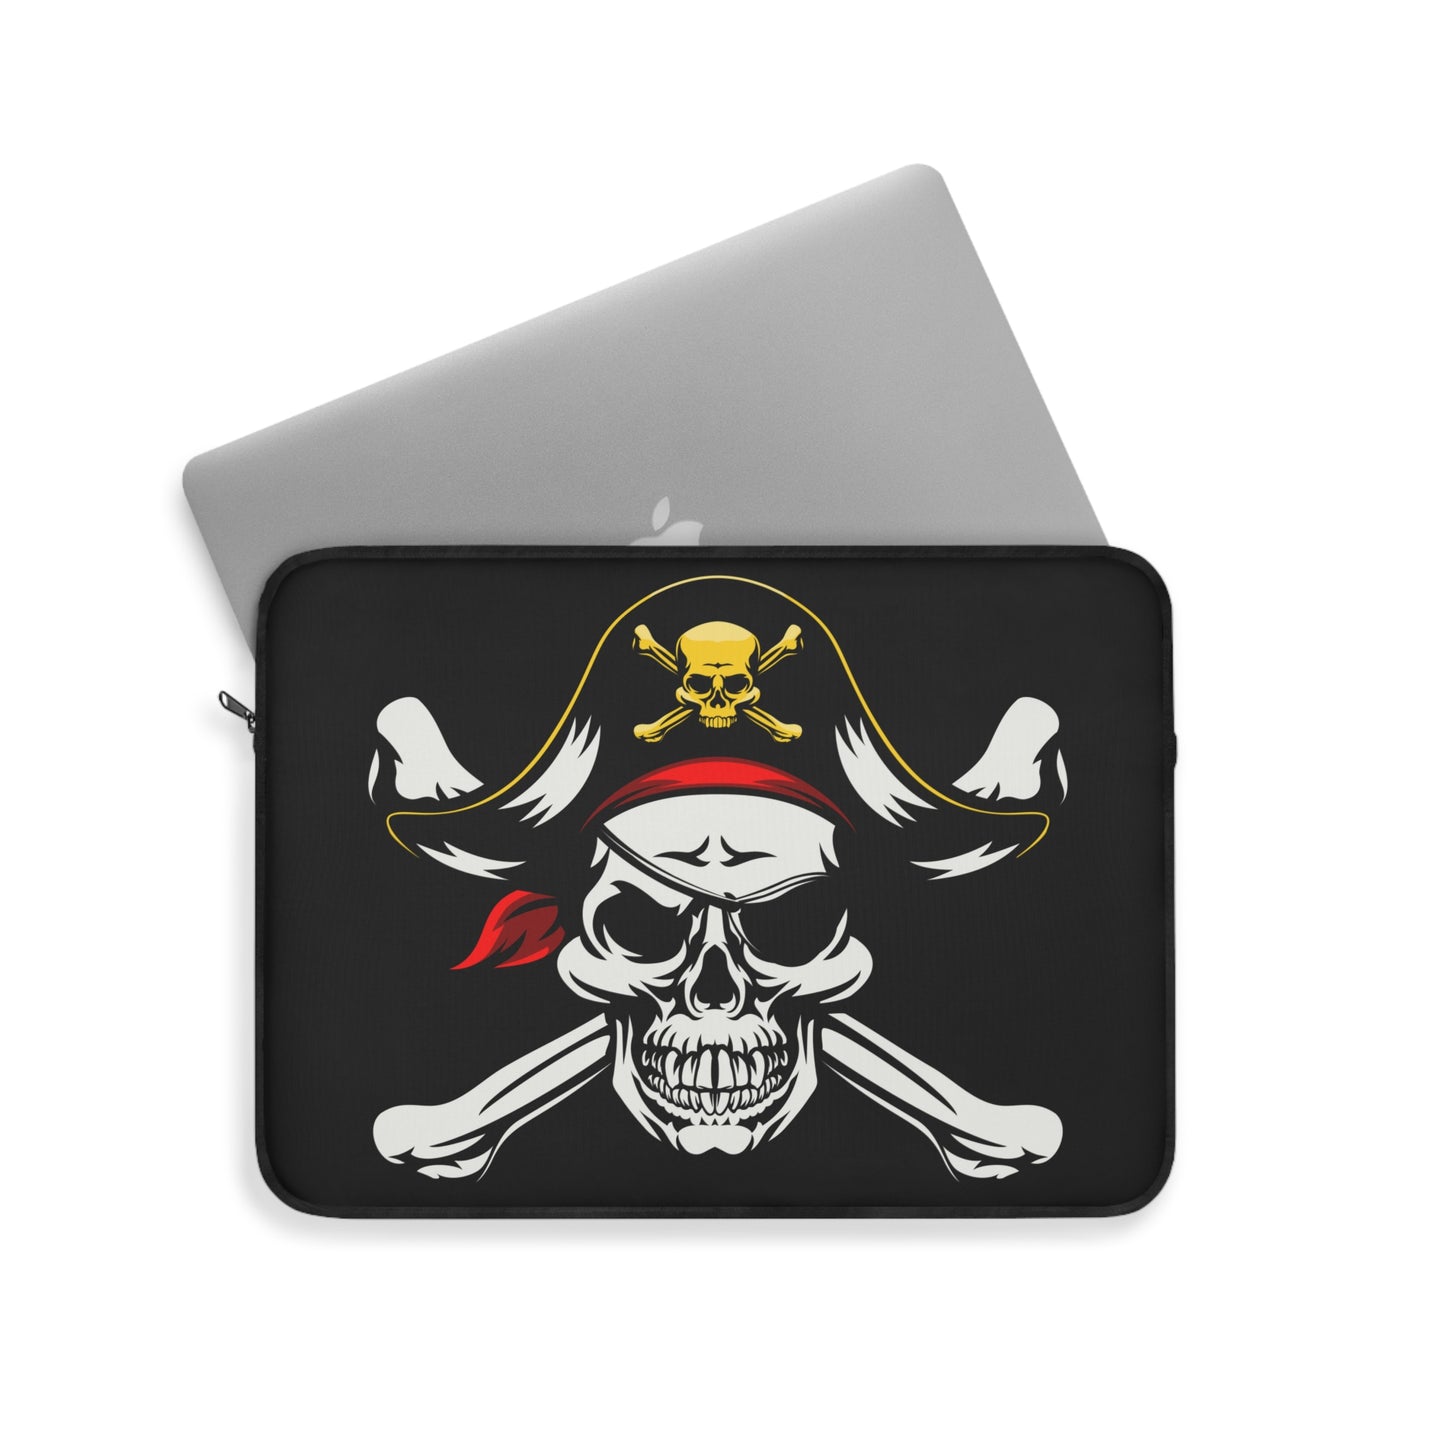 Laptop Sleeve - Classic Pirate Laptop Sleeve and Tablet Sleeve. Comes In 3 Sizes